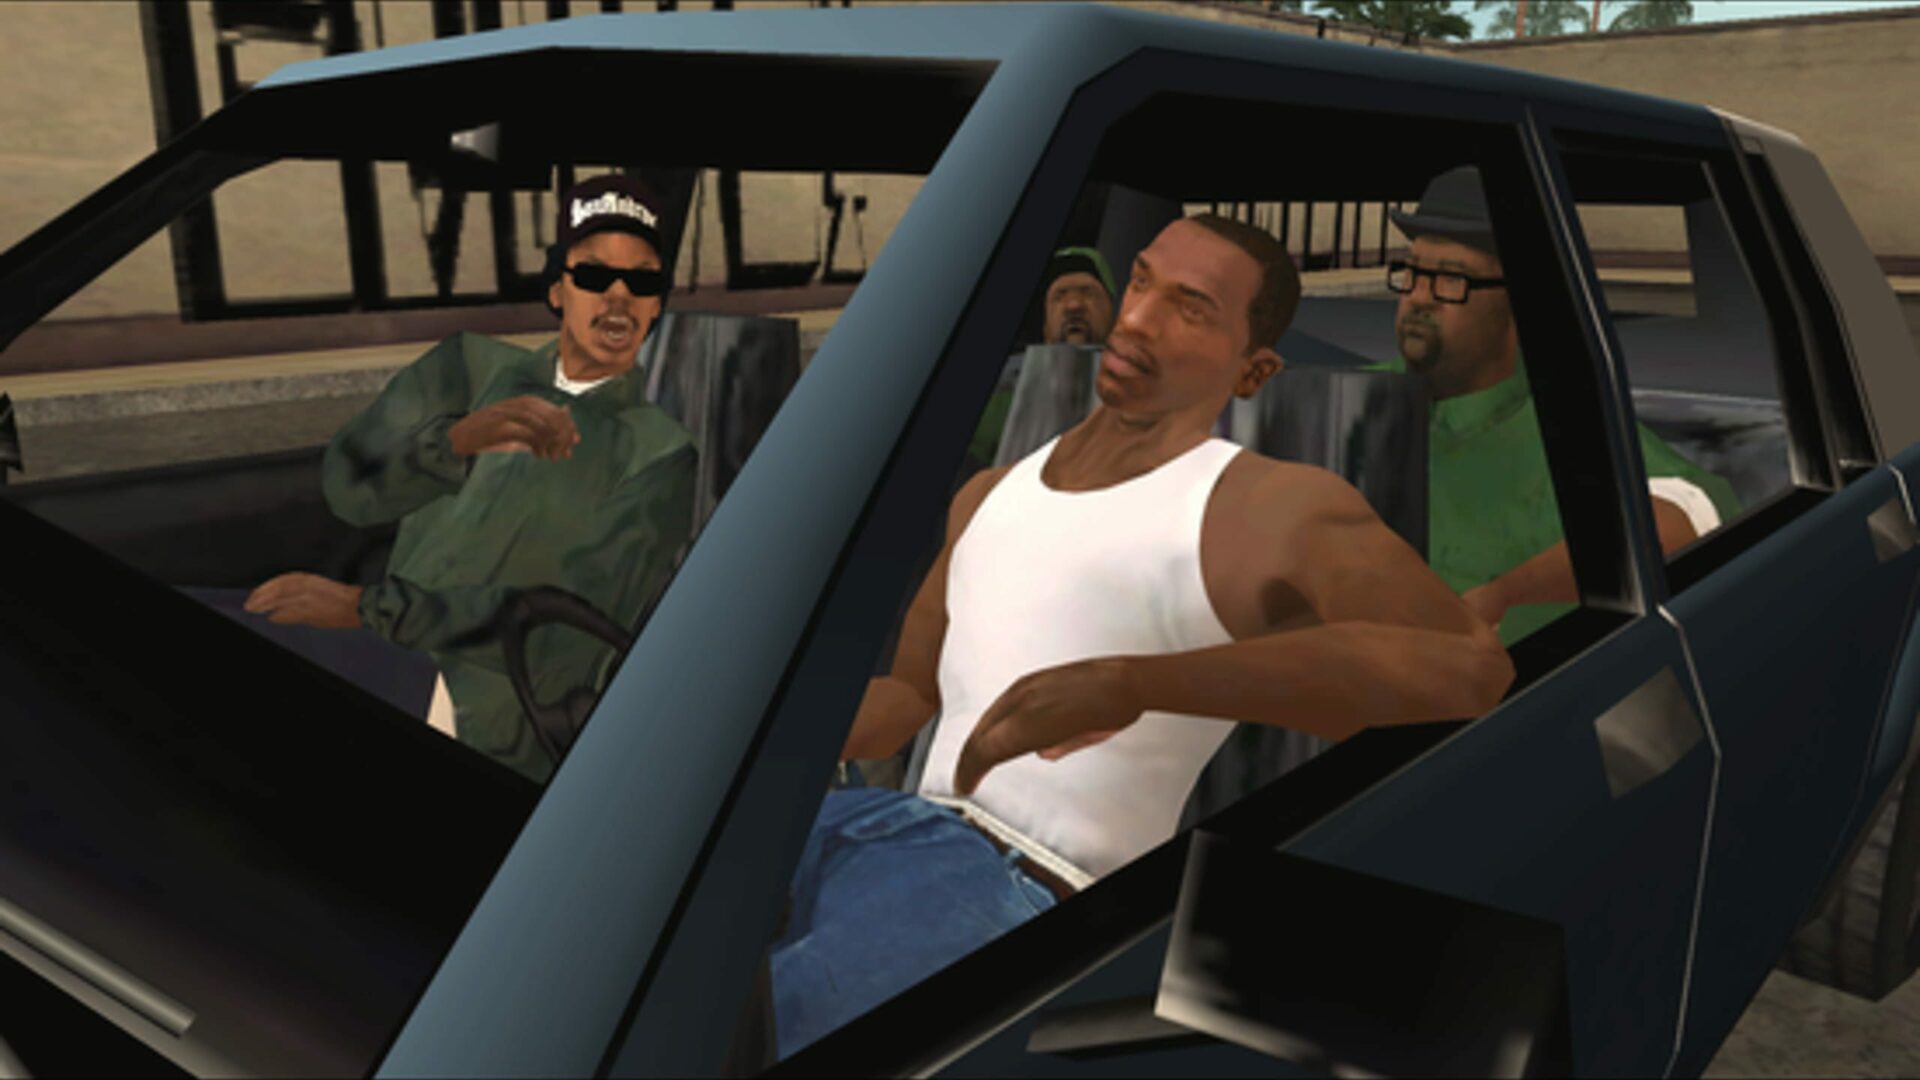 Grand Theft Auto: San Andreas (PC) CD key for Steam - price from $21.01